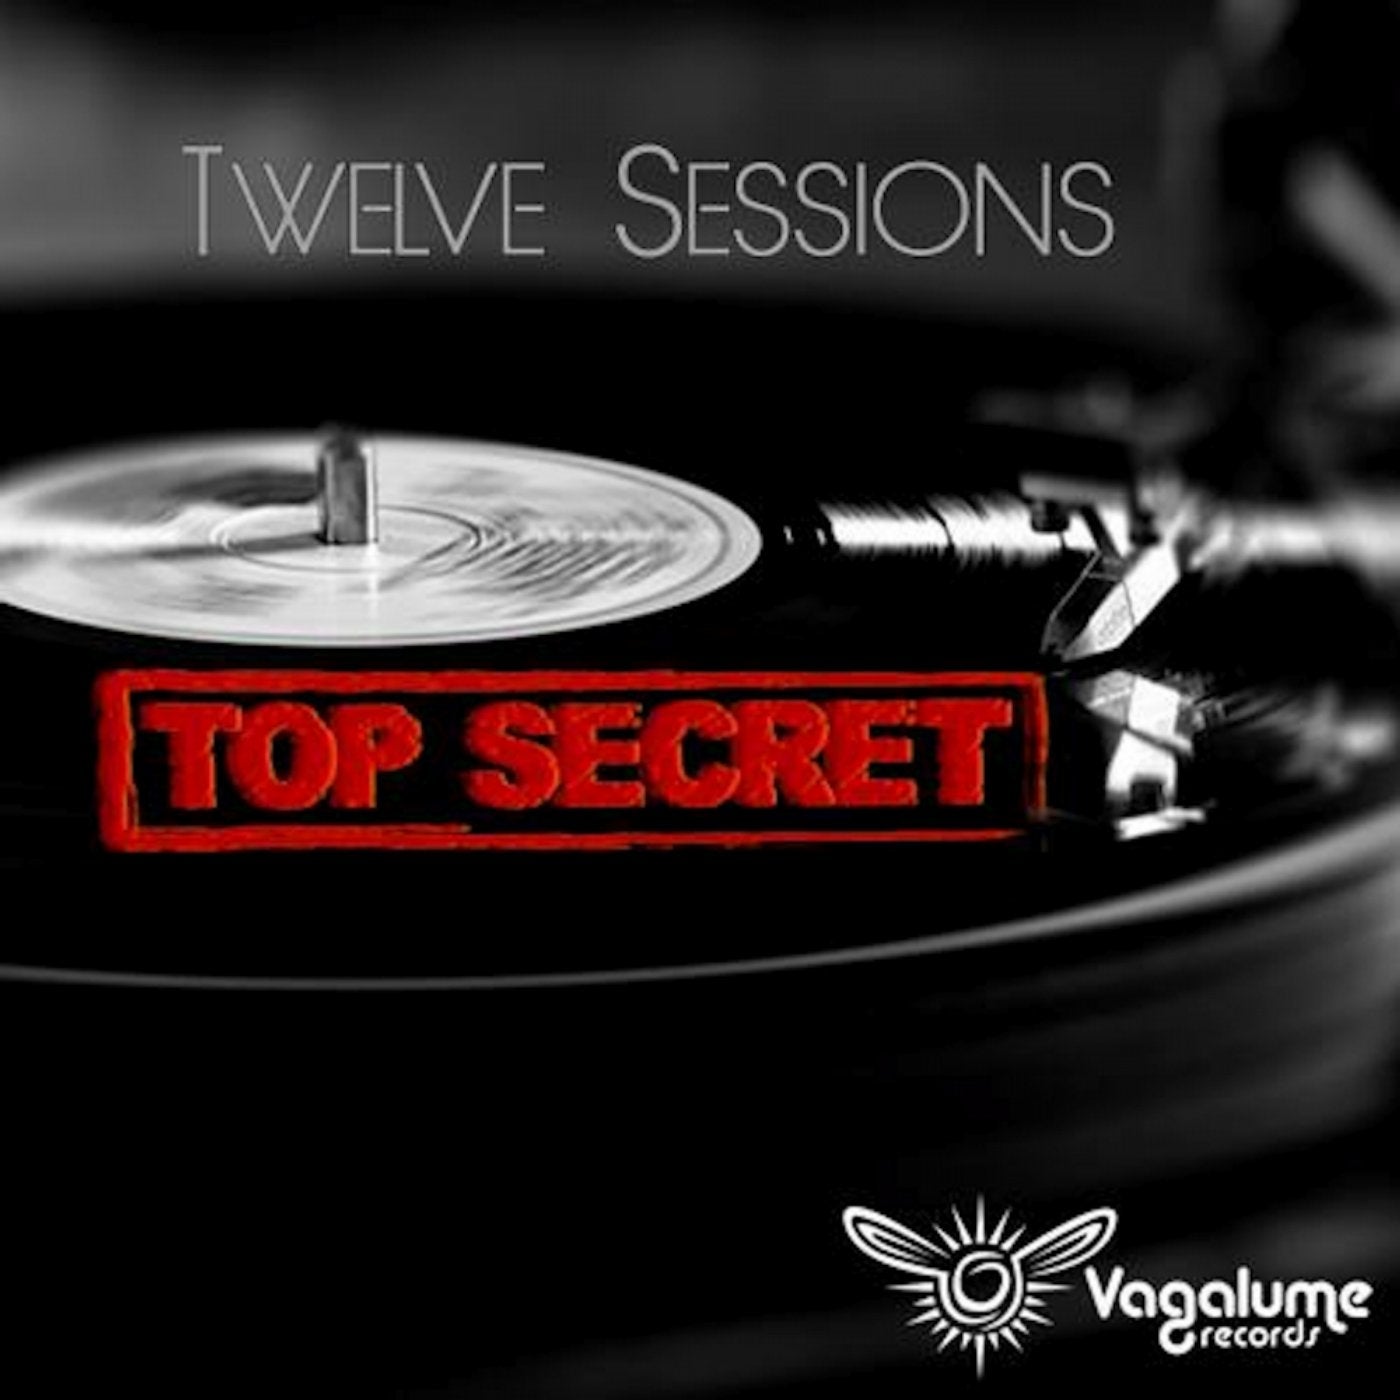 Top music album. Sessions. Музыка из топ секрет. Secret service the Maxi-Singles collection 1. Top session.